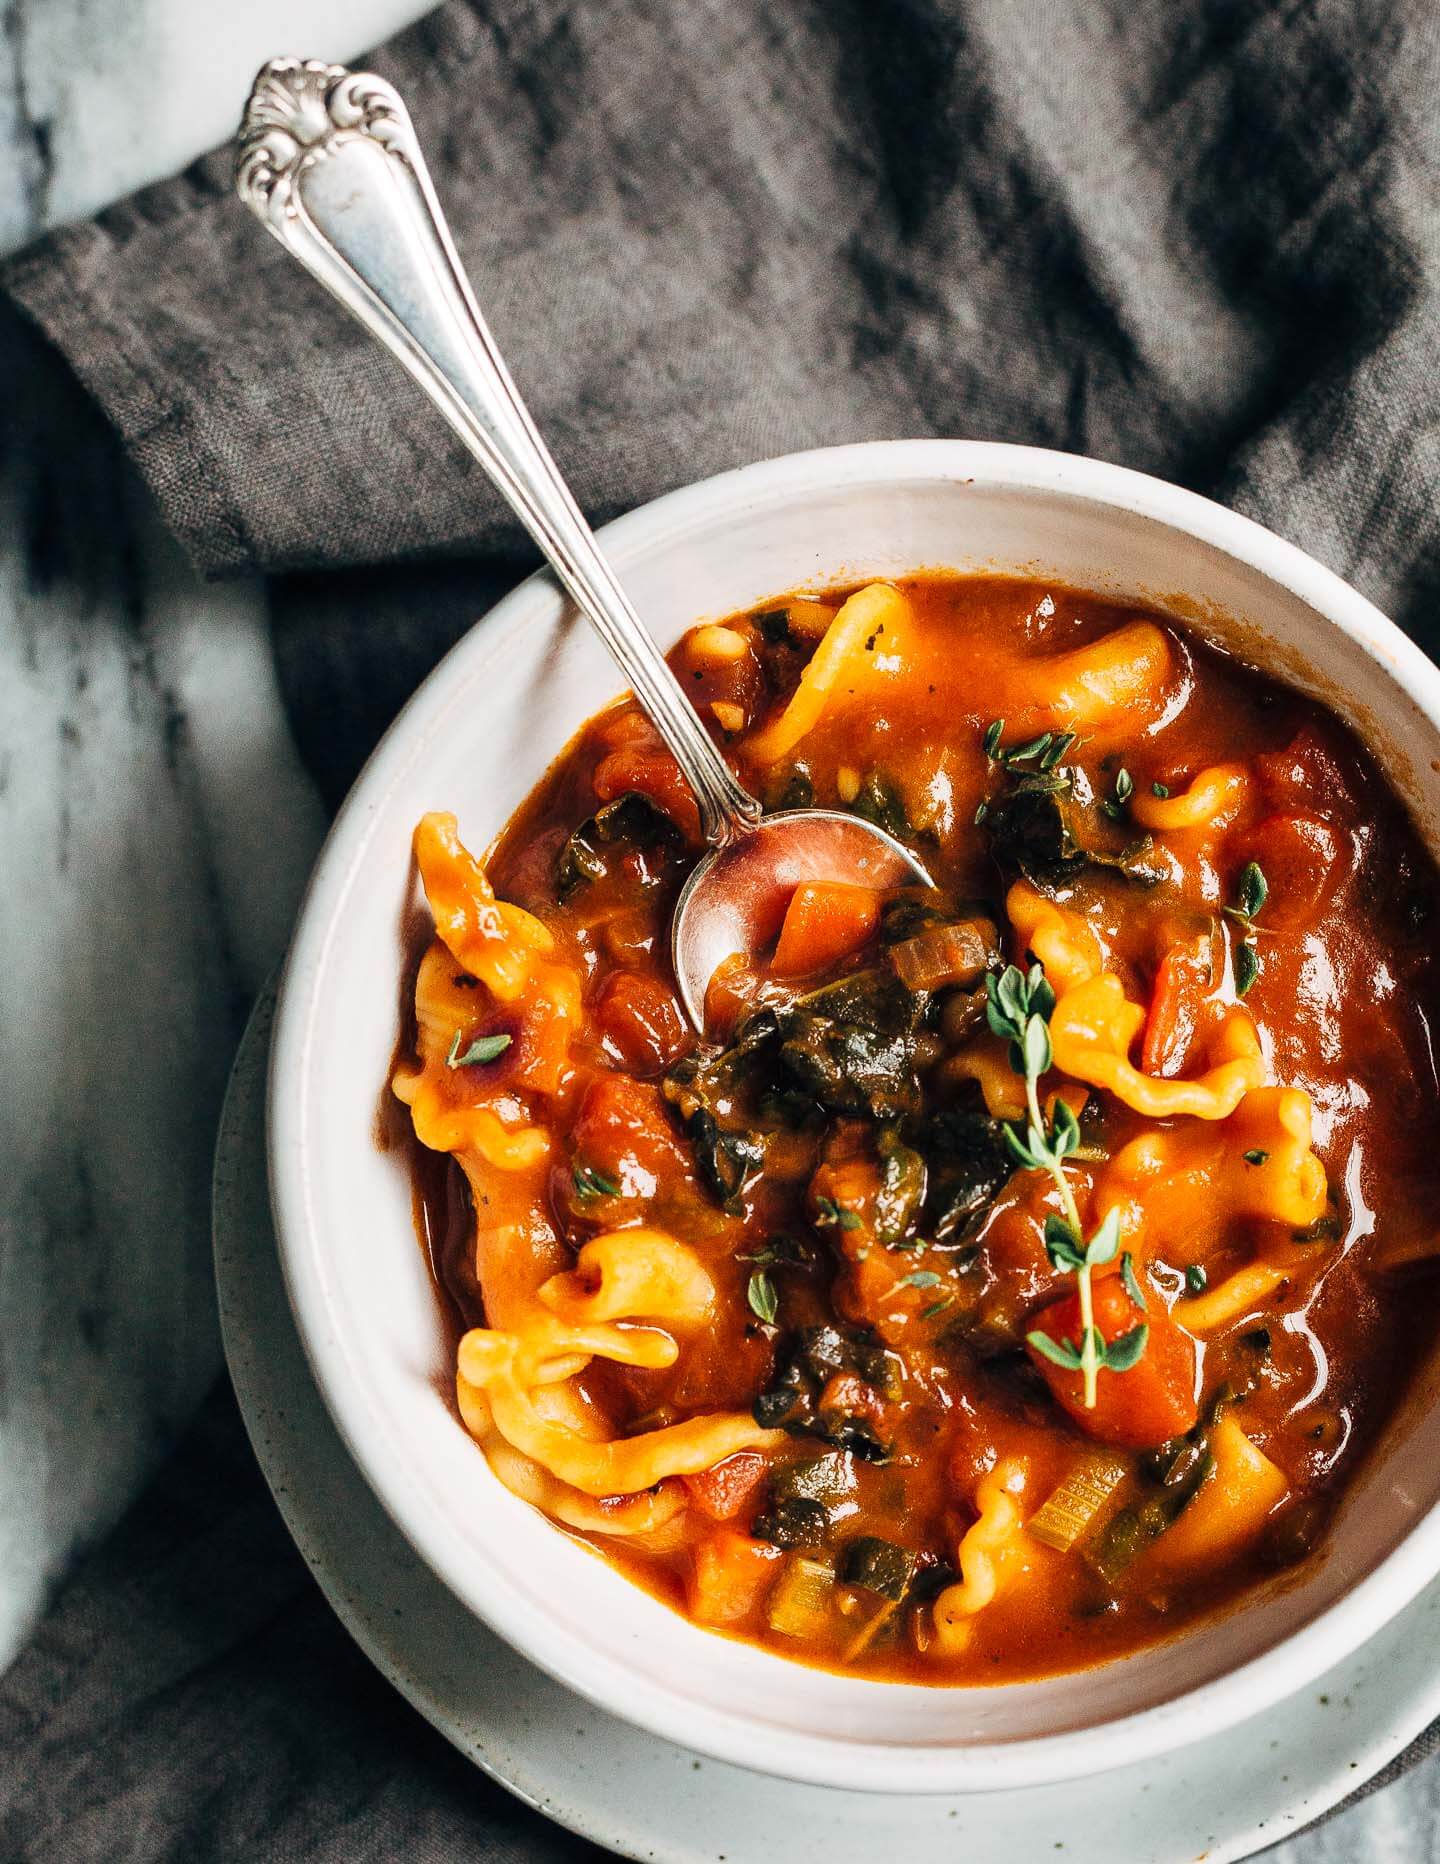 A meal-worthy vegan vegetable pasta soup with a little bit of everything: delicious vegetable broth, fire-roasted tomatoes, kale, carrots, thyme, and toothsome pasta.